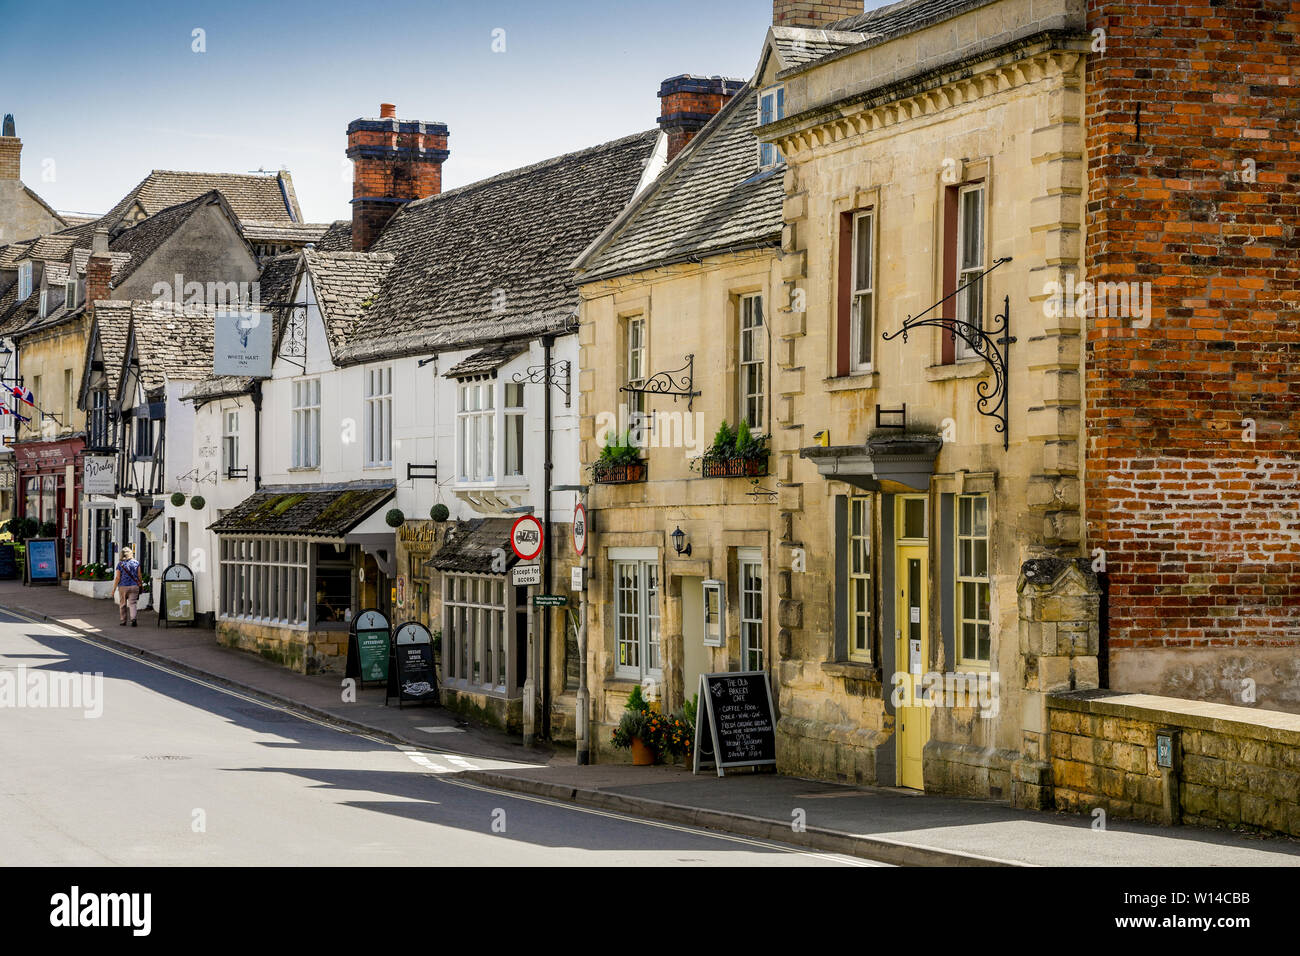 Street scene of the historic Cotswold town of Winchcombe, Gloucestershire UK Stock Photo